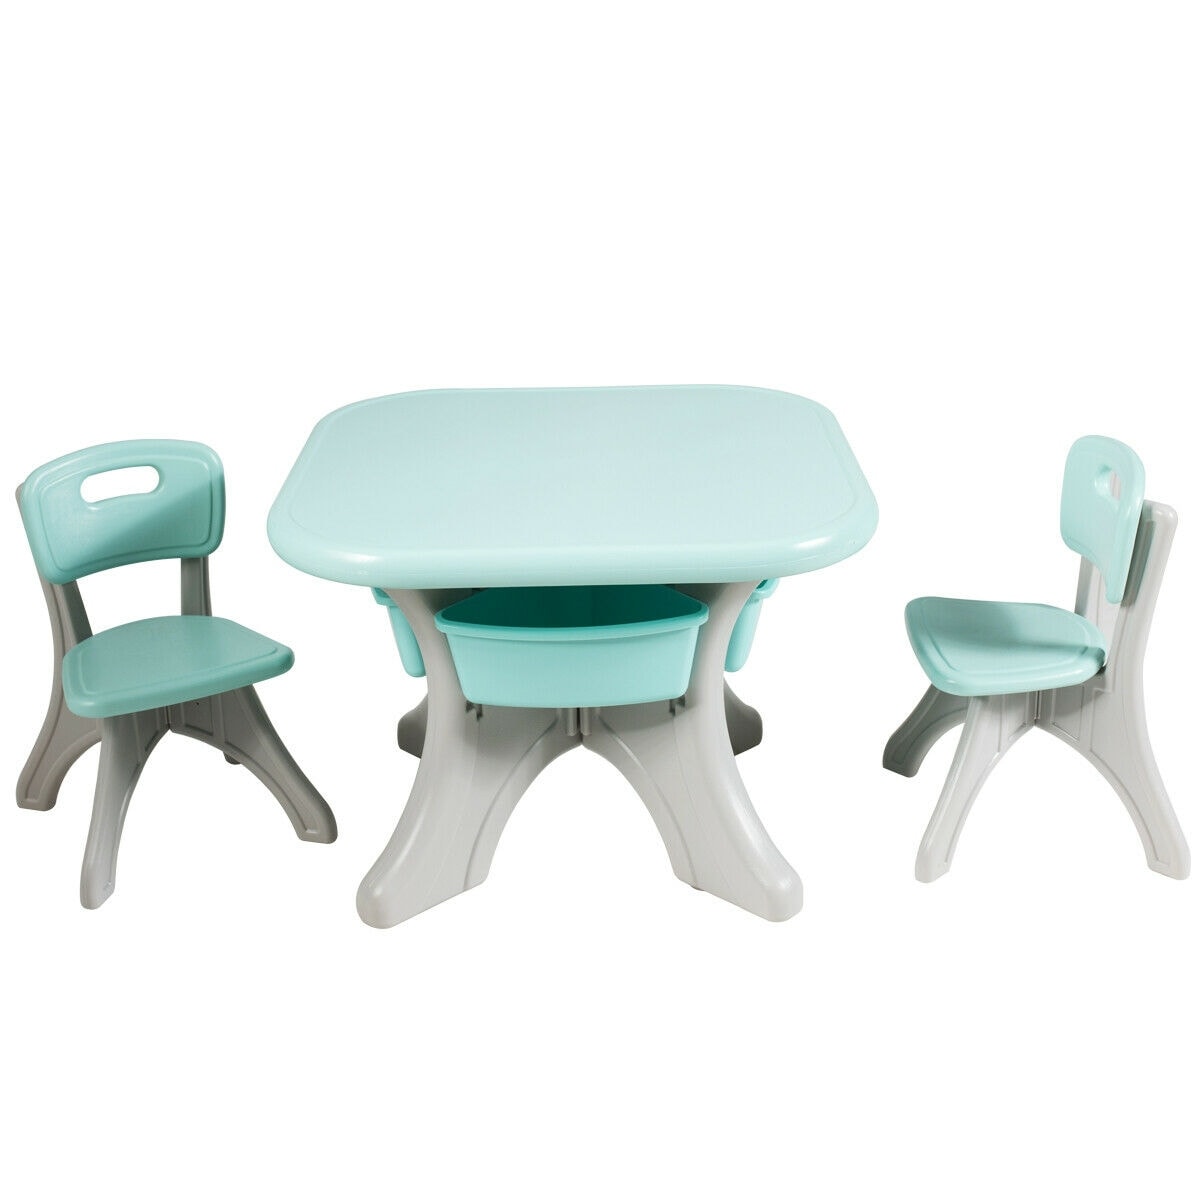 https://ak1.ostkcdn.com/images/products/is/images/direct/52d18f3aa885c149b0b05c9b95fa2552edff33b5/Gymax-Children-Kids-Activity-Table-Chair-Set-Play-Furniture-W-Storage.jpg